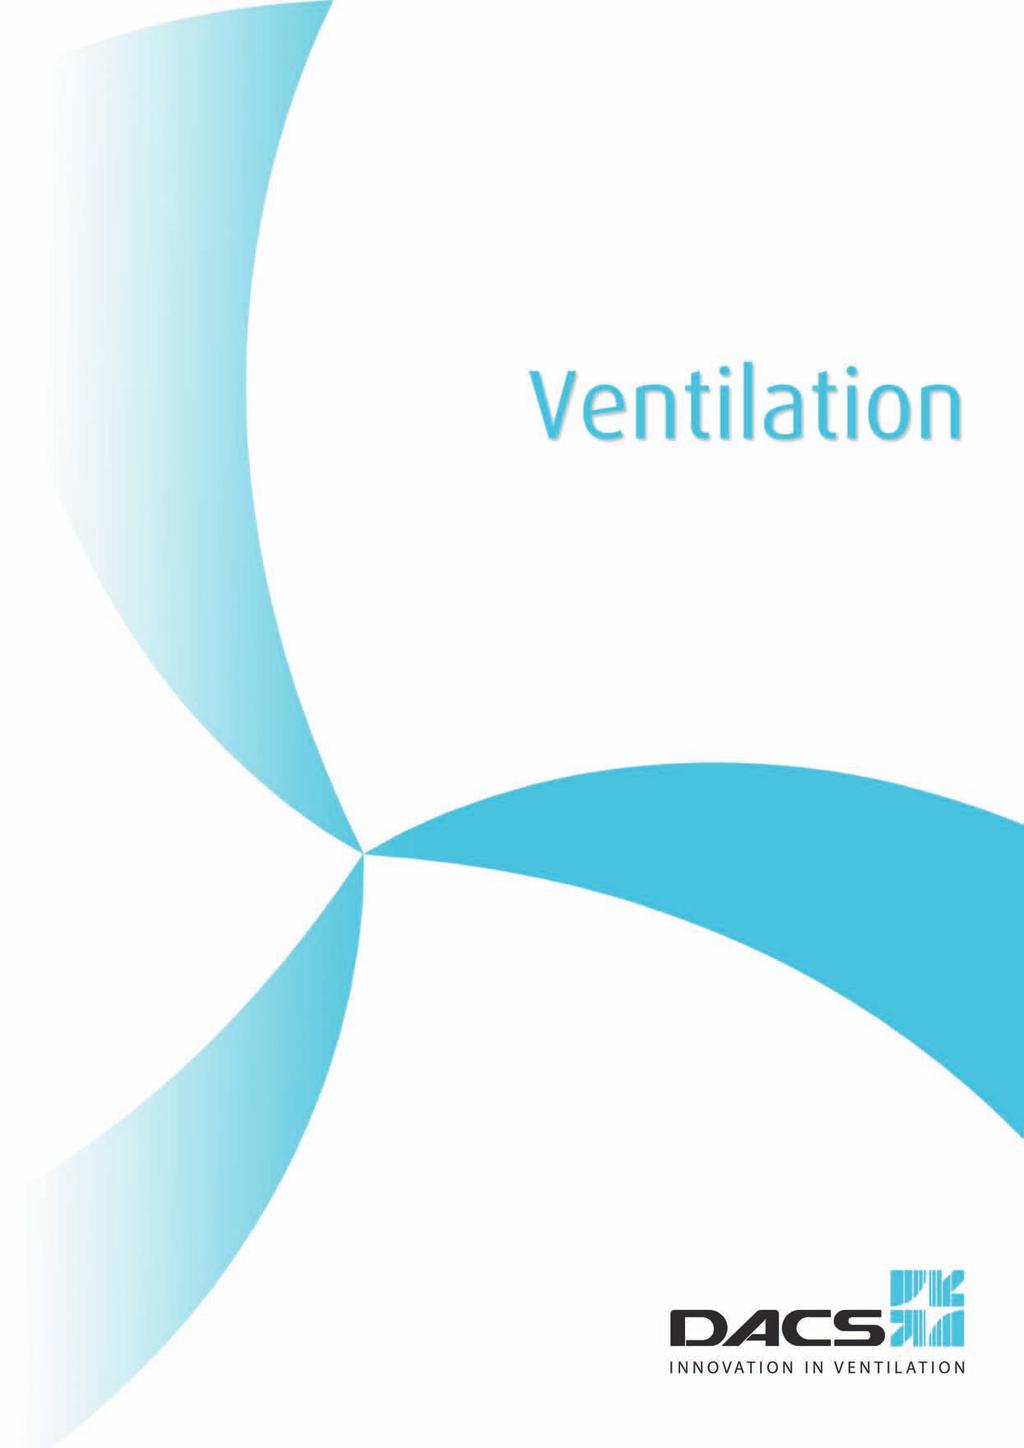 710 Ventilation The idea behind our climate